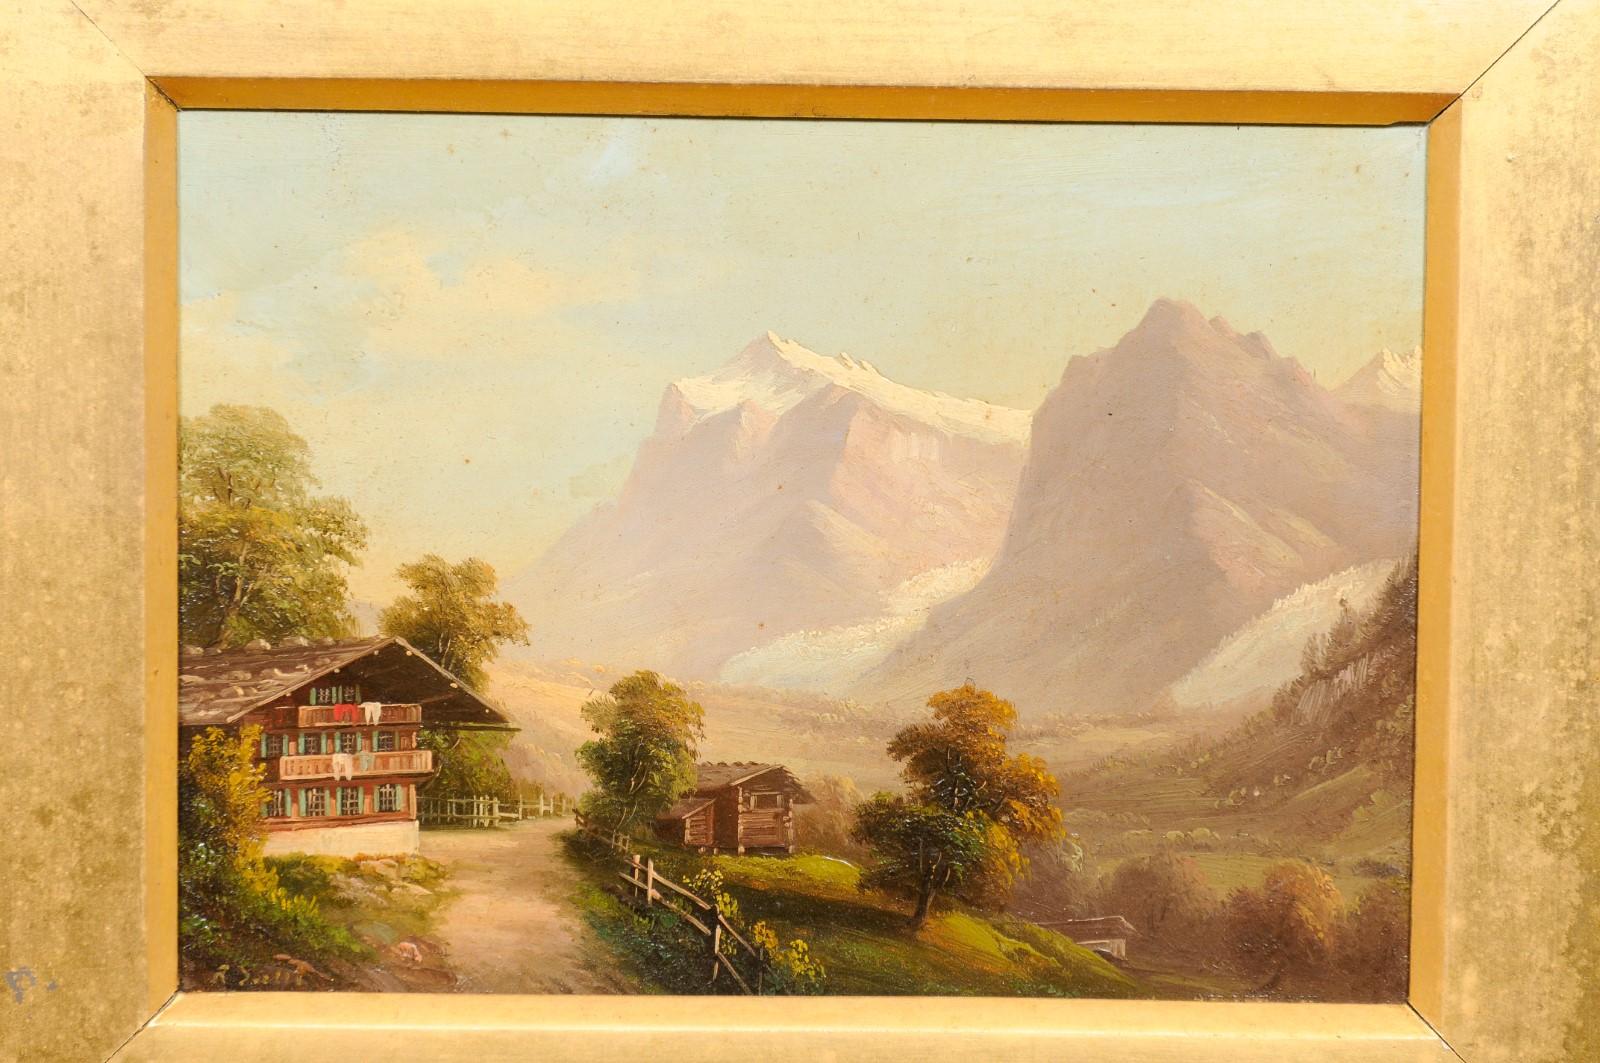 Pair of Gilt Framed Oil on Board Landscape Paintings of Mountain Scenes, 19th Century